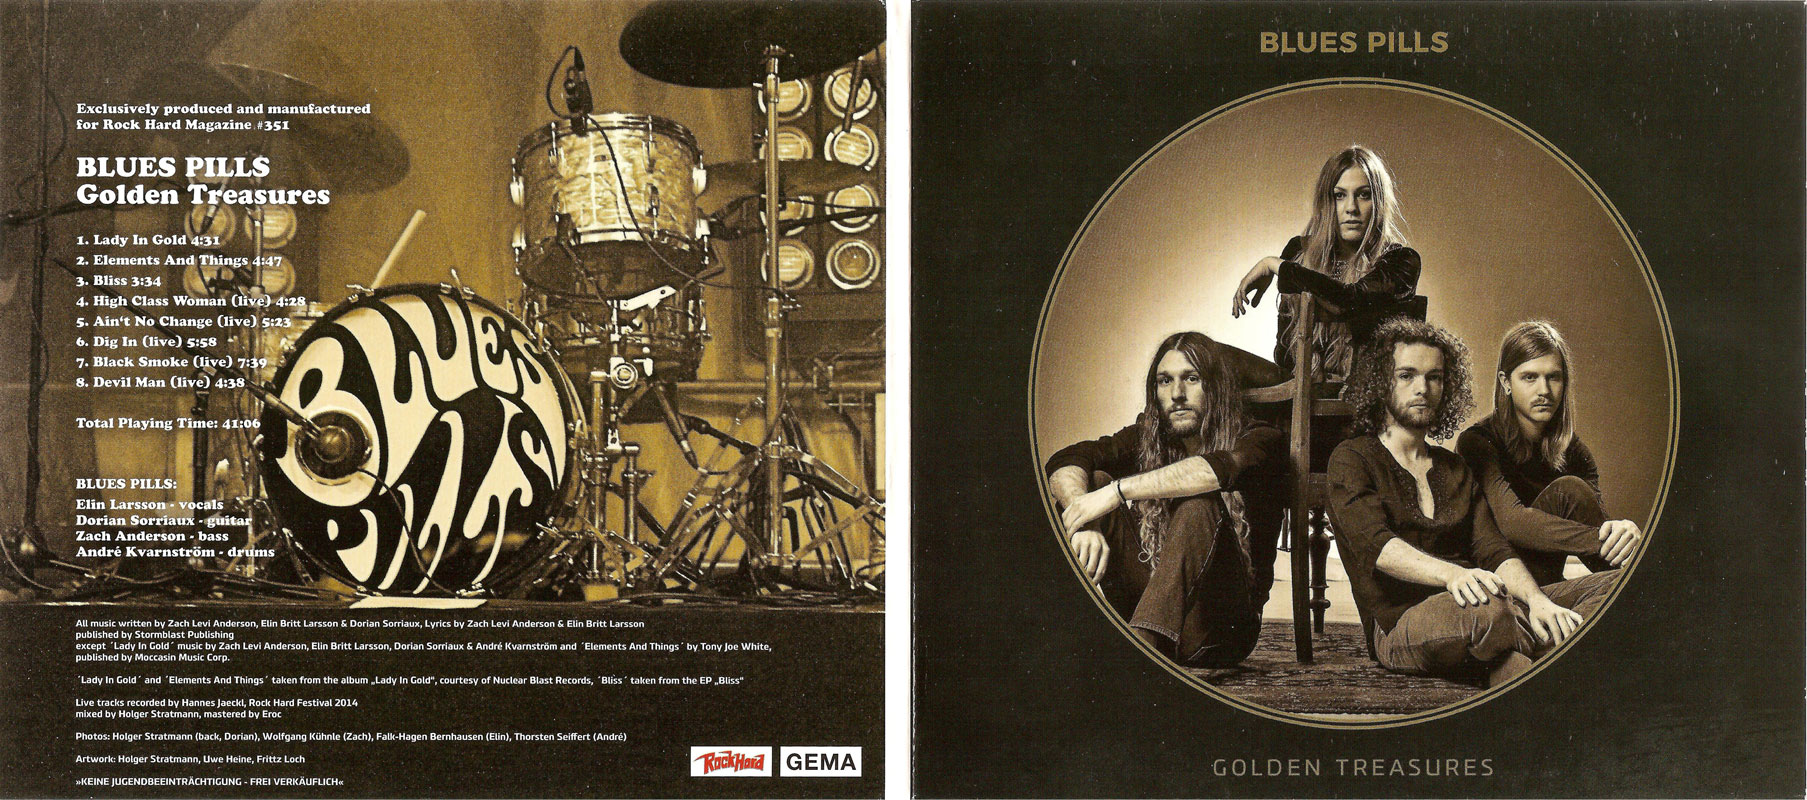 Covers Box Sk Blues Pills Golden Treasures 16 High Quality Dvd Blueray Movie